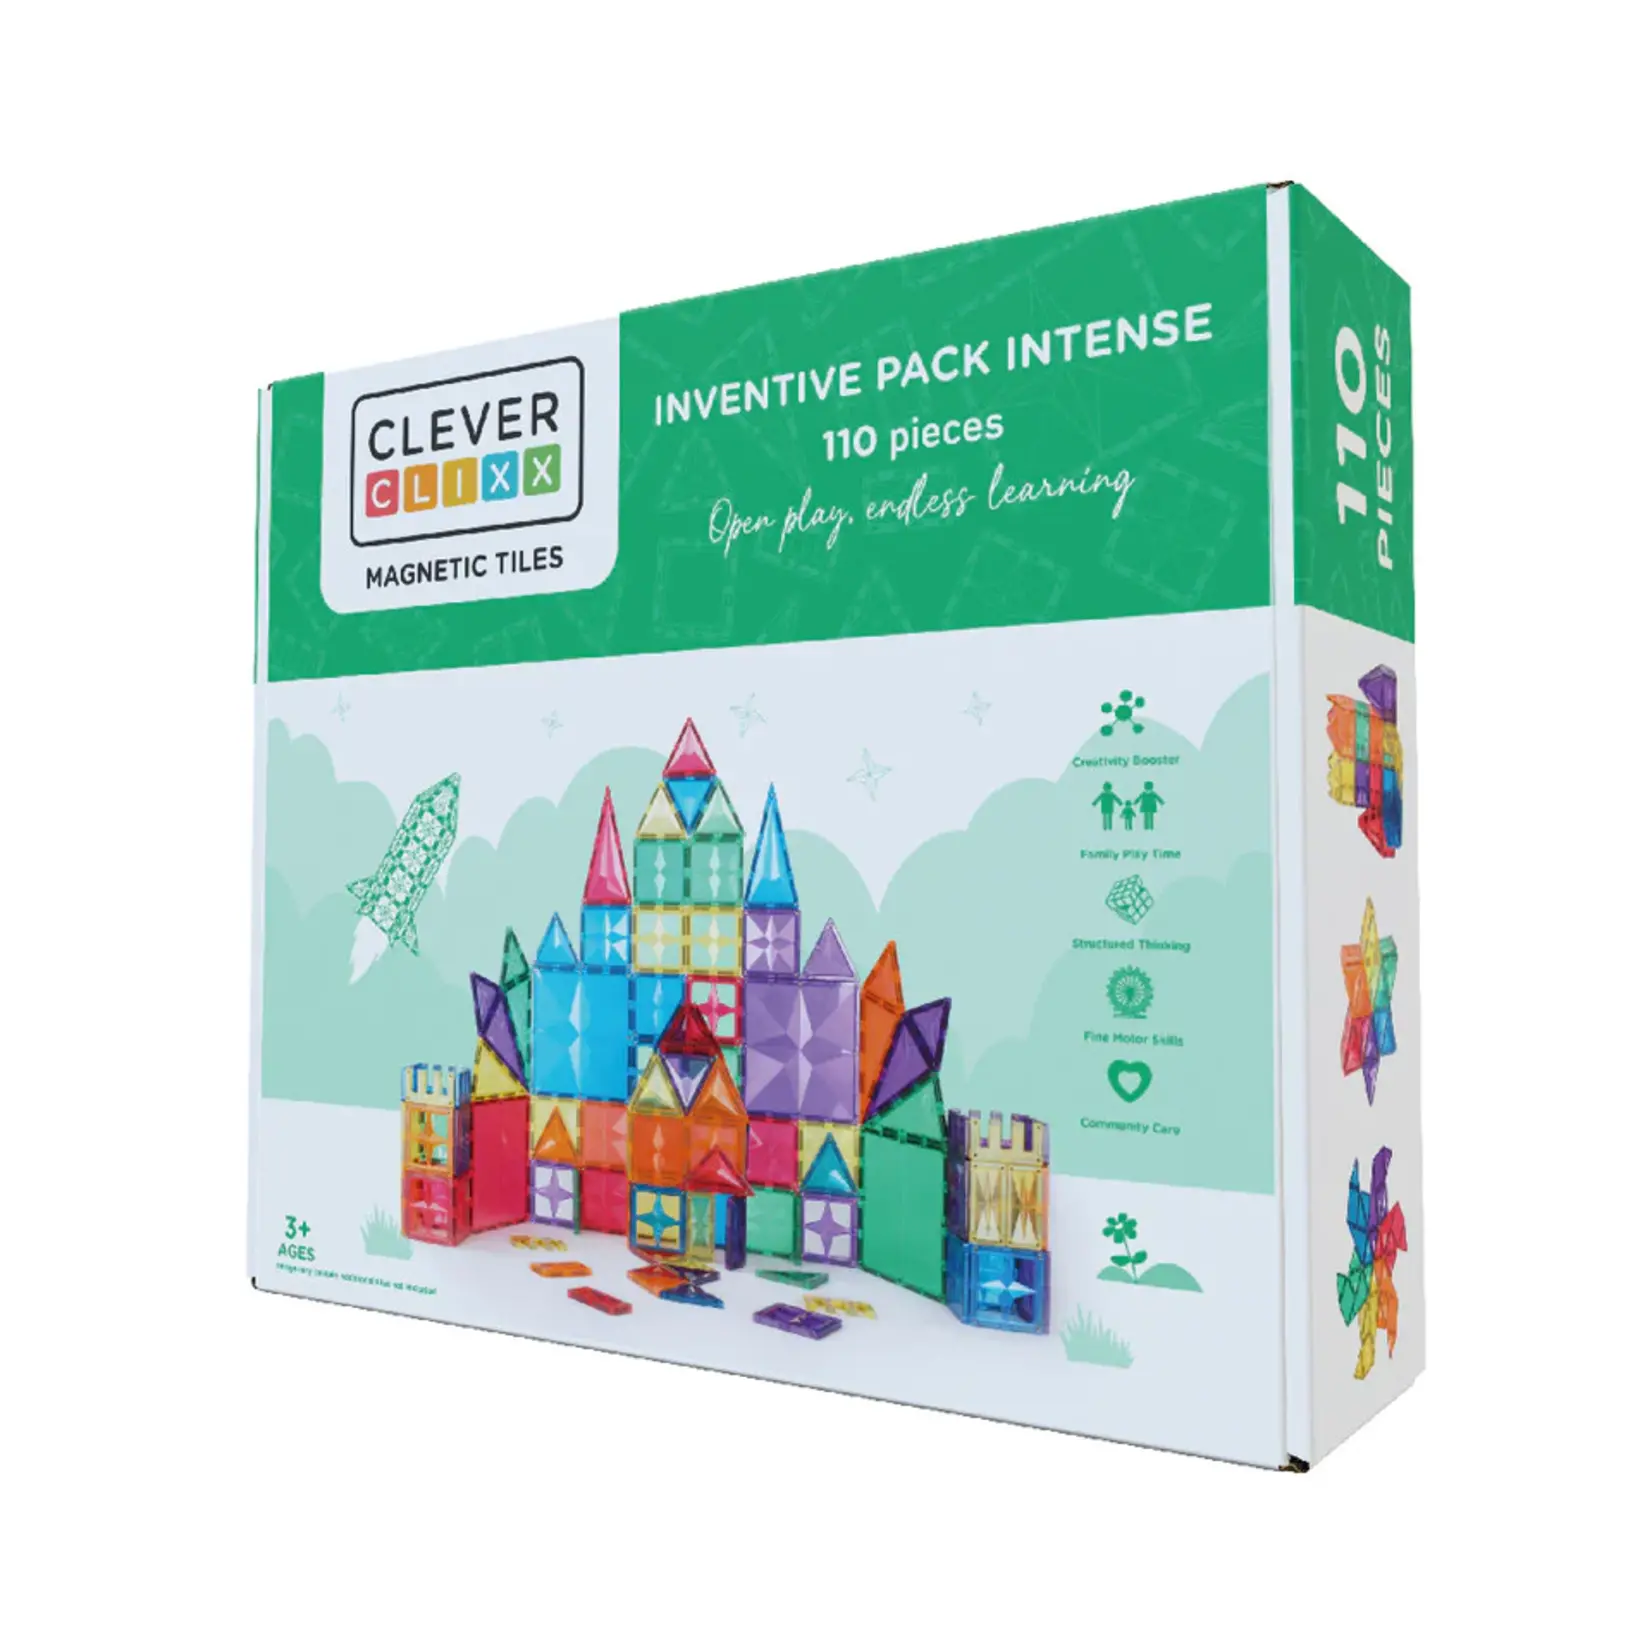 Cleverclixx Cleverclixx - Inventive Pack Intense  | 110 Pieces